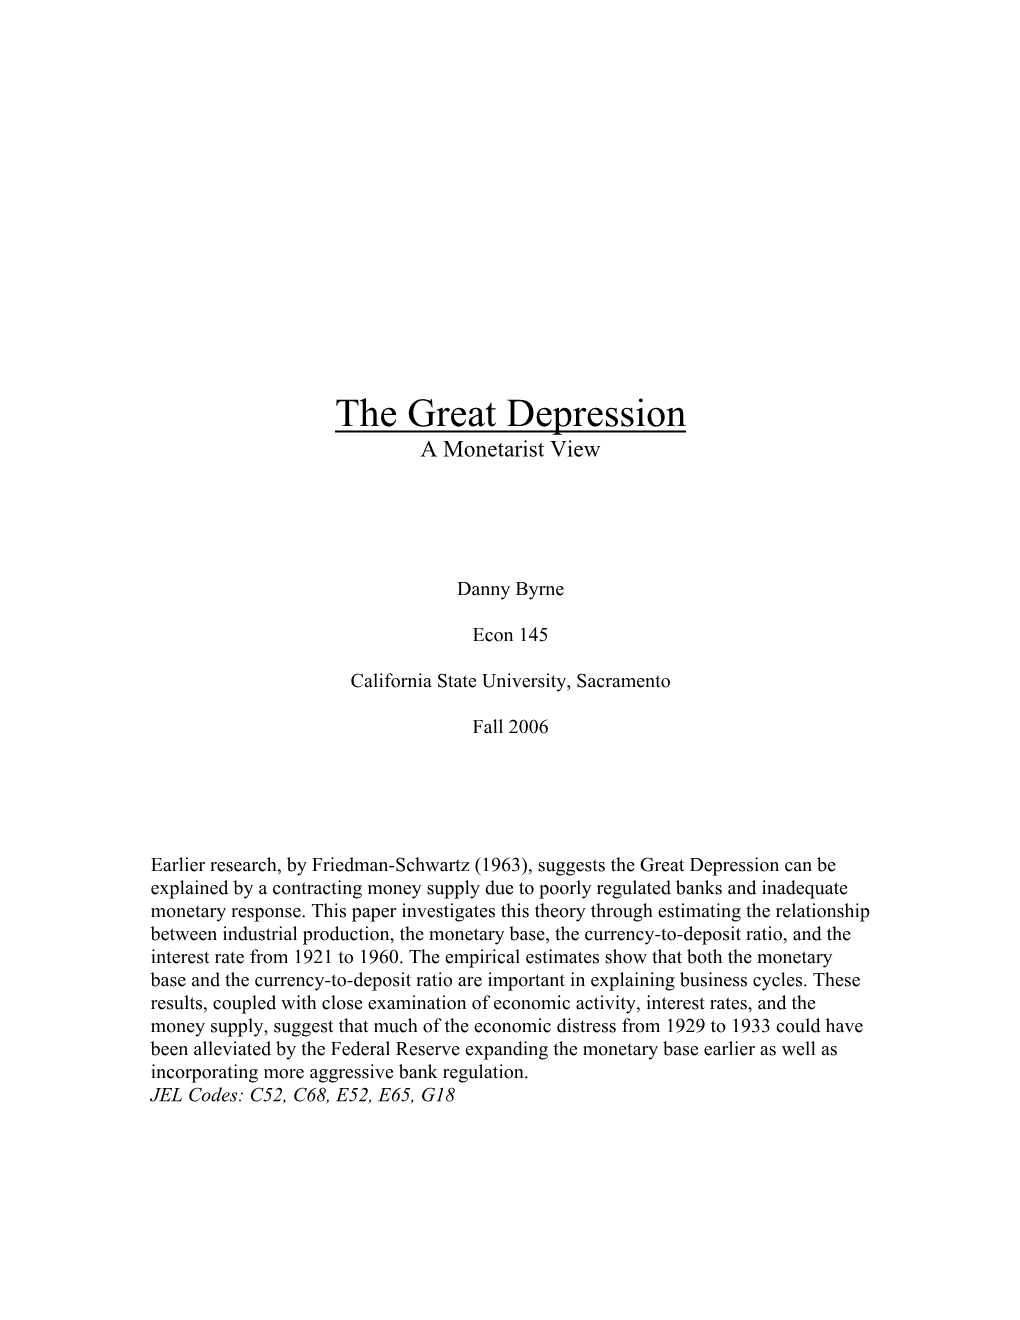 The Great Depression a Monetarist View